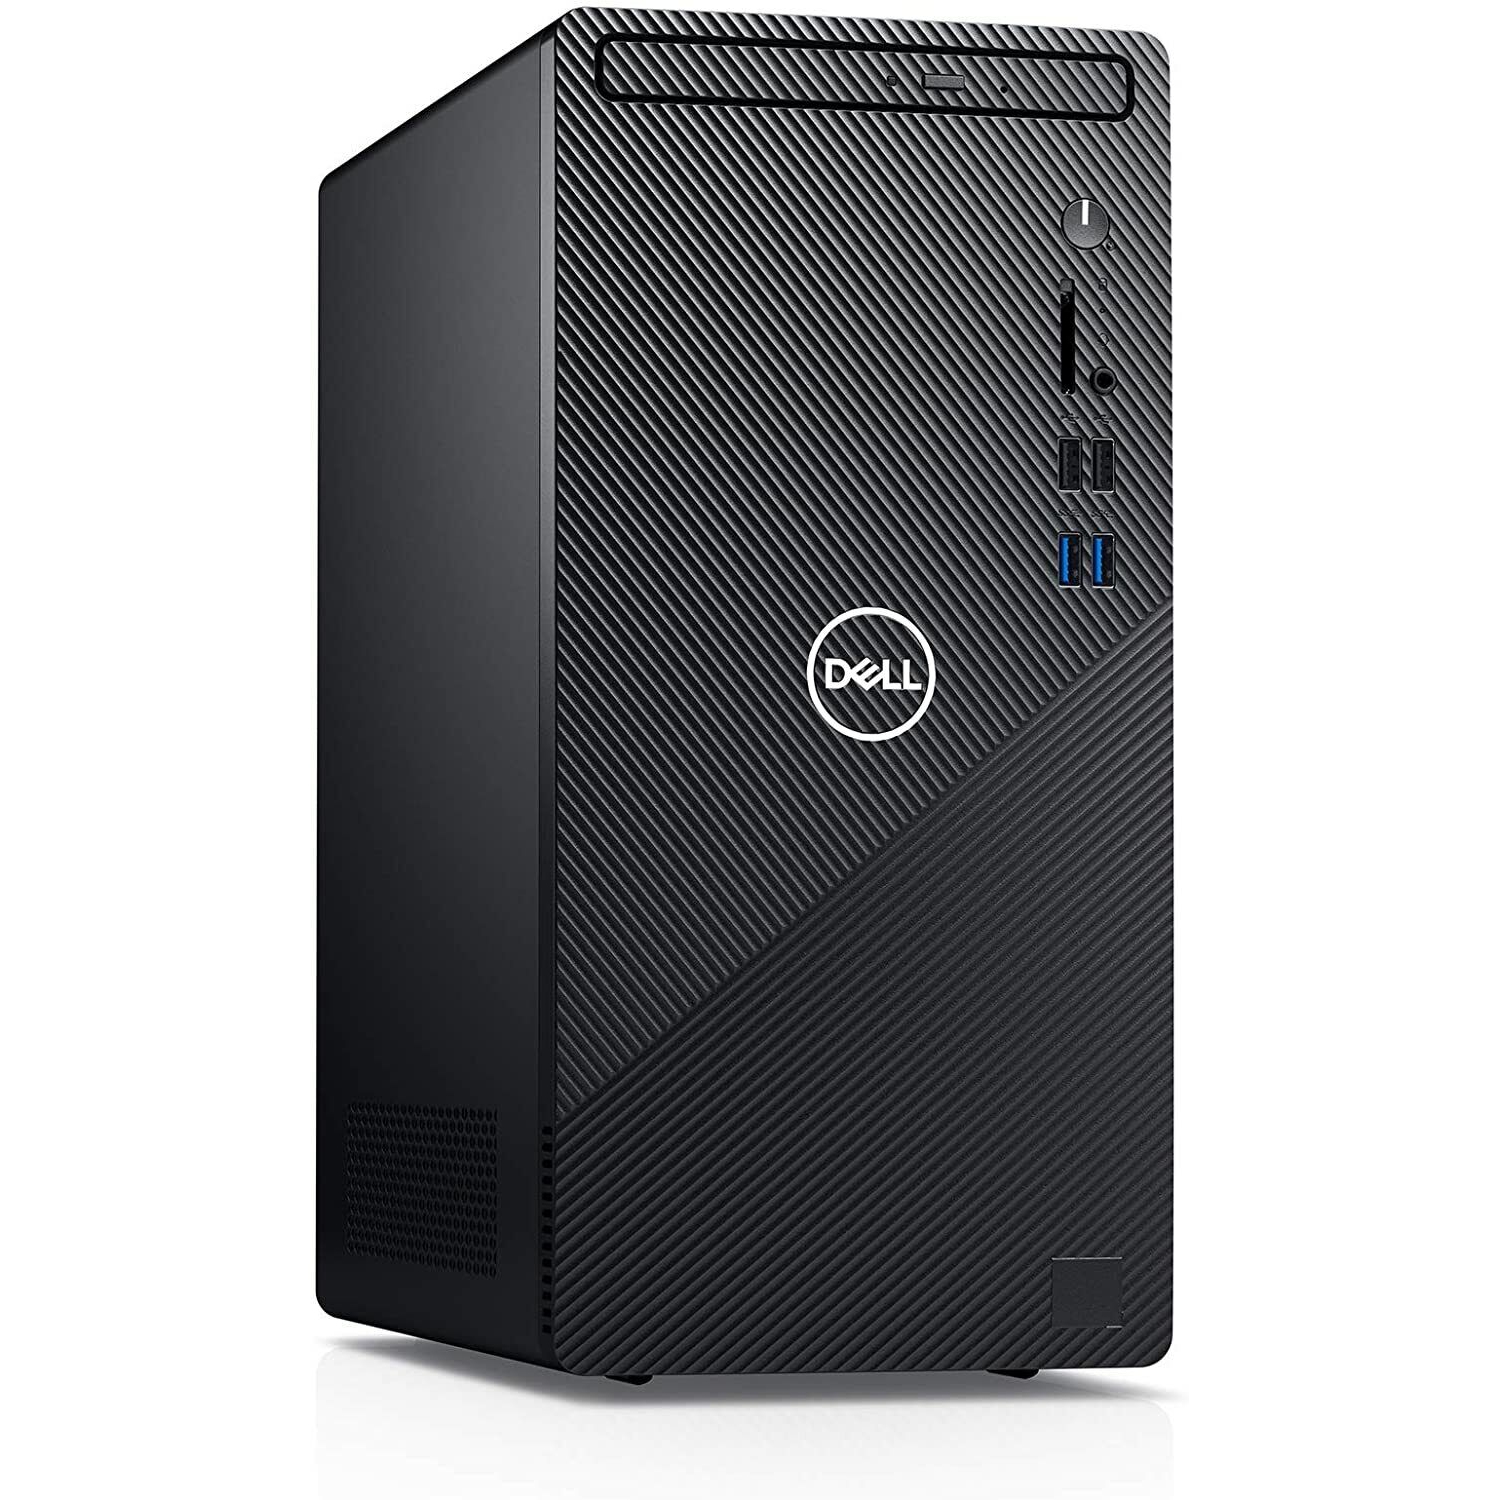 Open Box Dell Inspiron 3891 Tower Computer i7-10700 2.9GHZ 12GB 512GB NVMe Win 11 Home Wifi